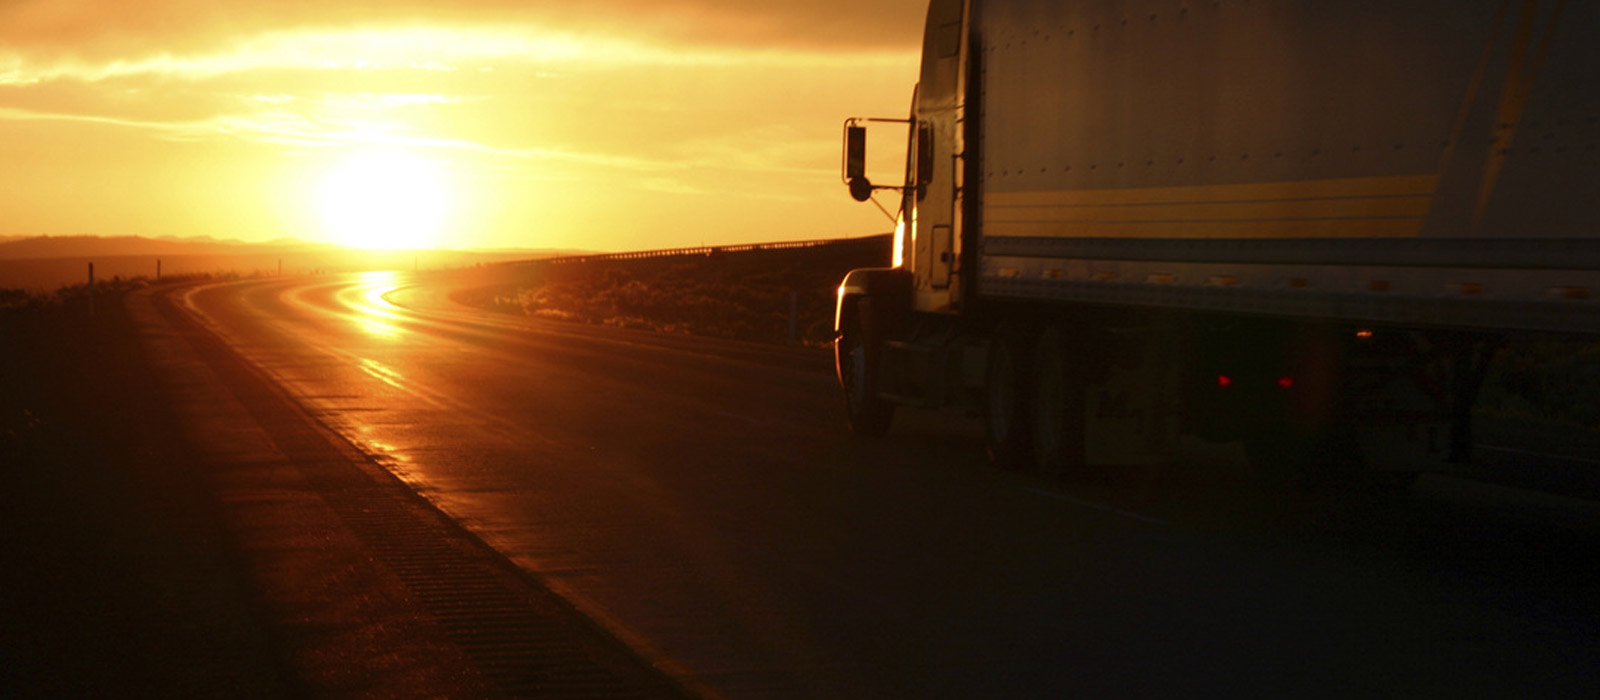 Tractor trailer driving into sunset